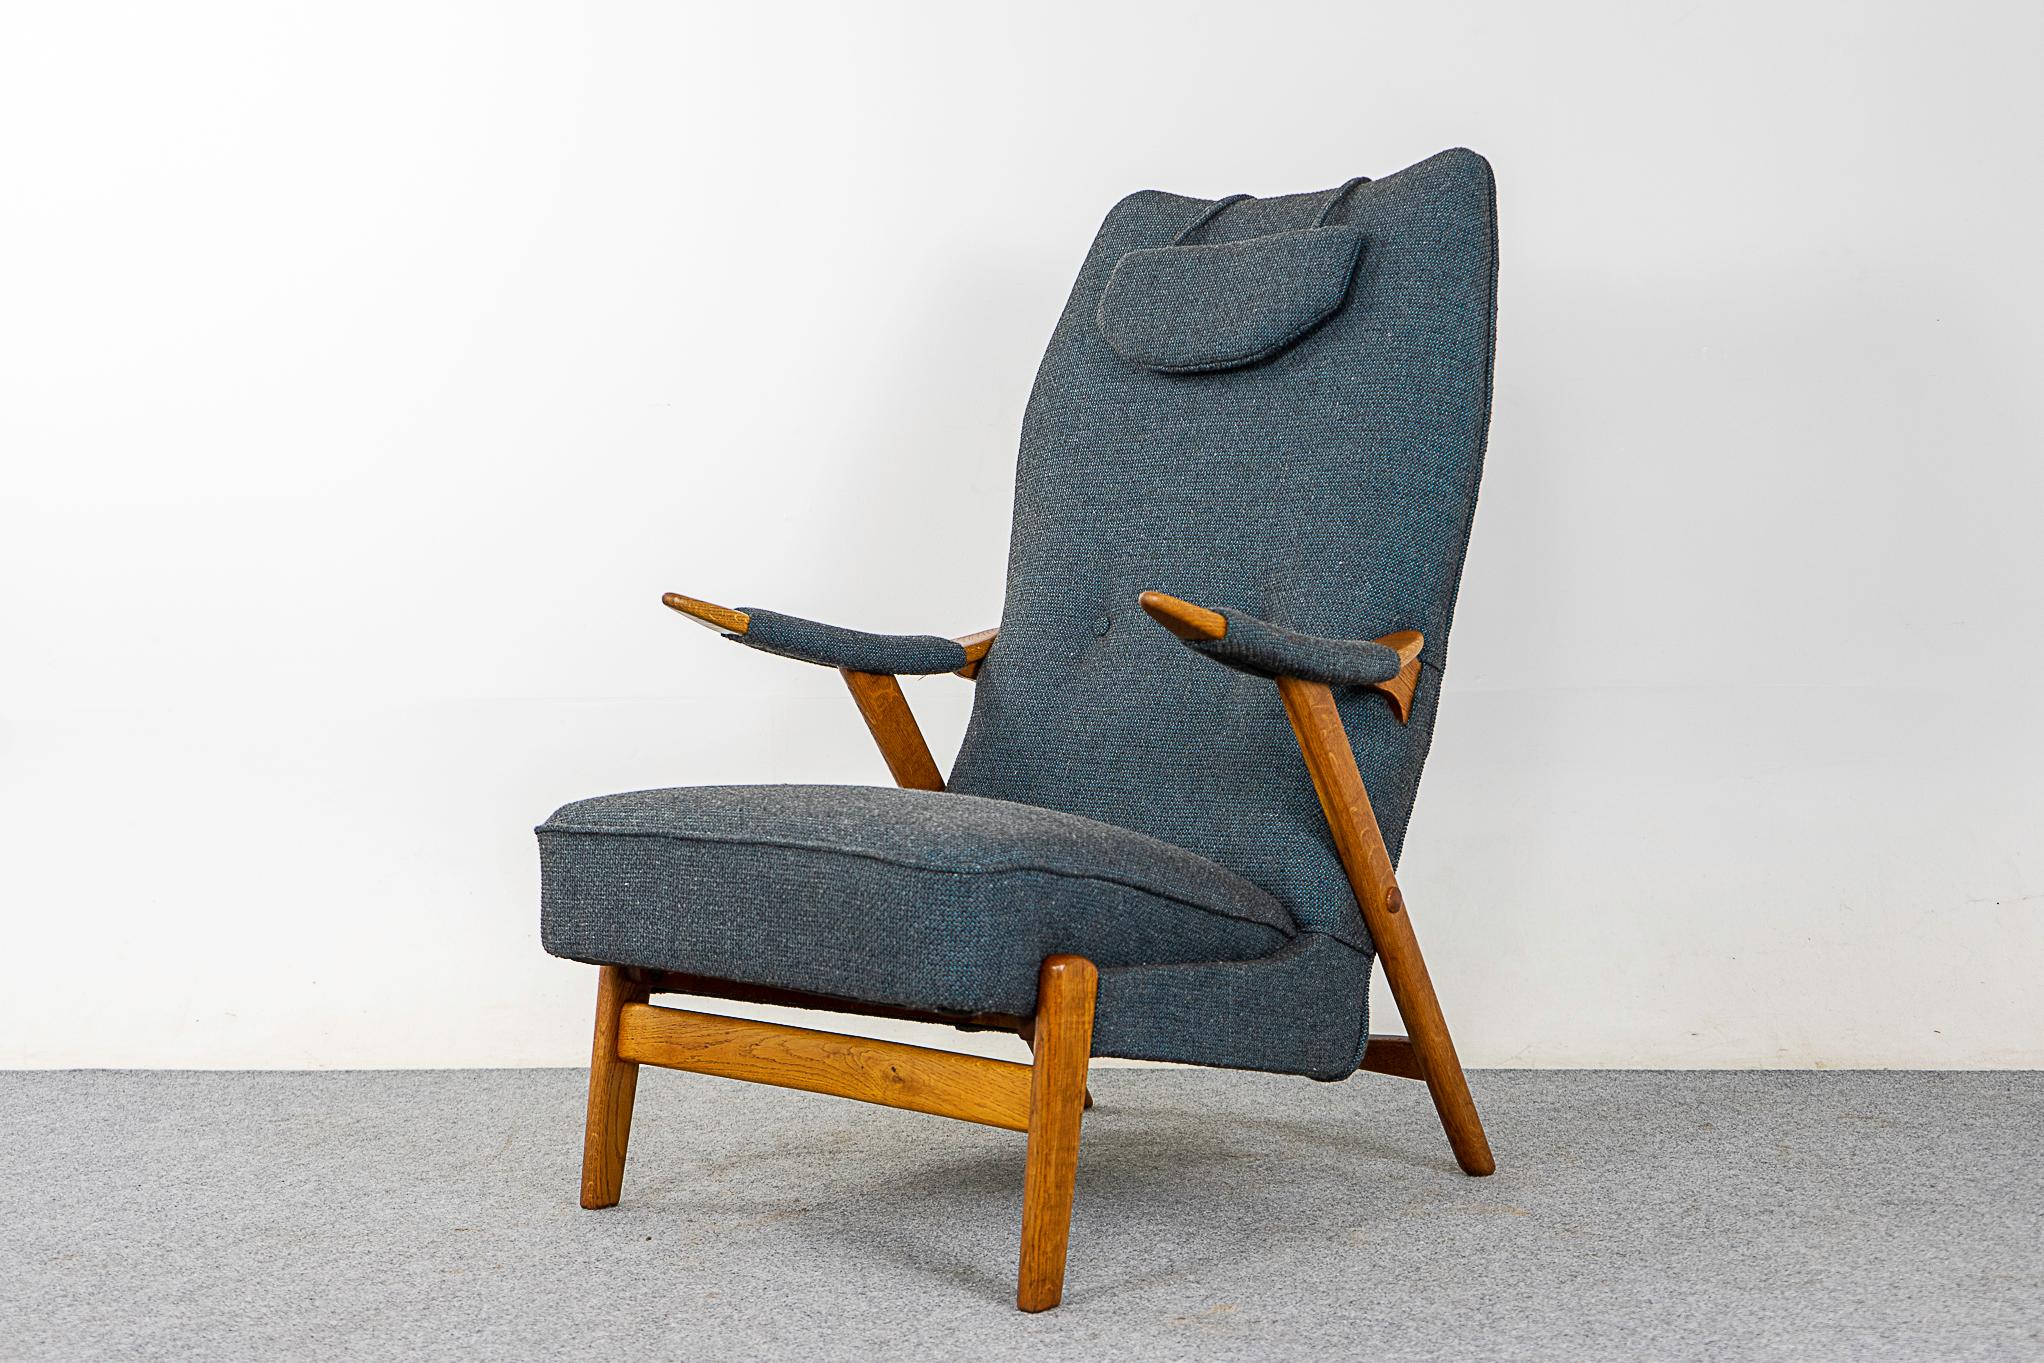 Oak lounge chair, circa 1960's. Sculptural frame with high back and neck pillow, a very comfortable sit. Beautiful new upholstery in grey/blue textured wool. Stunning!   